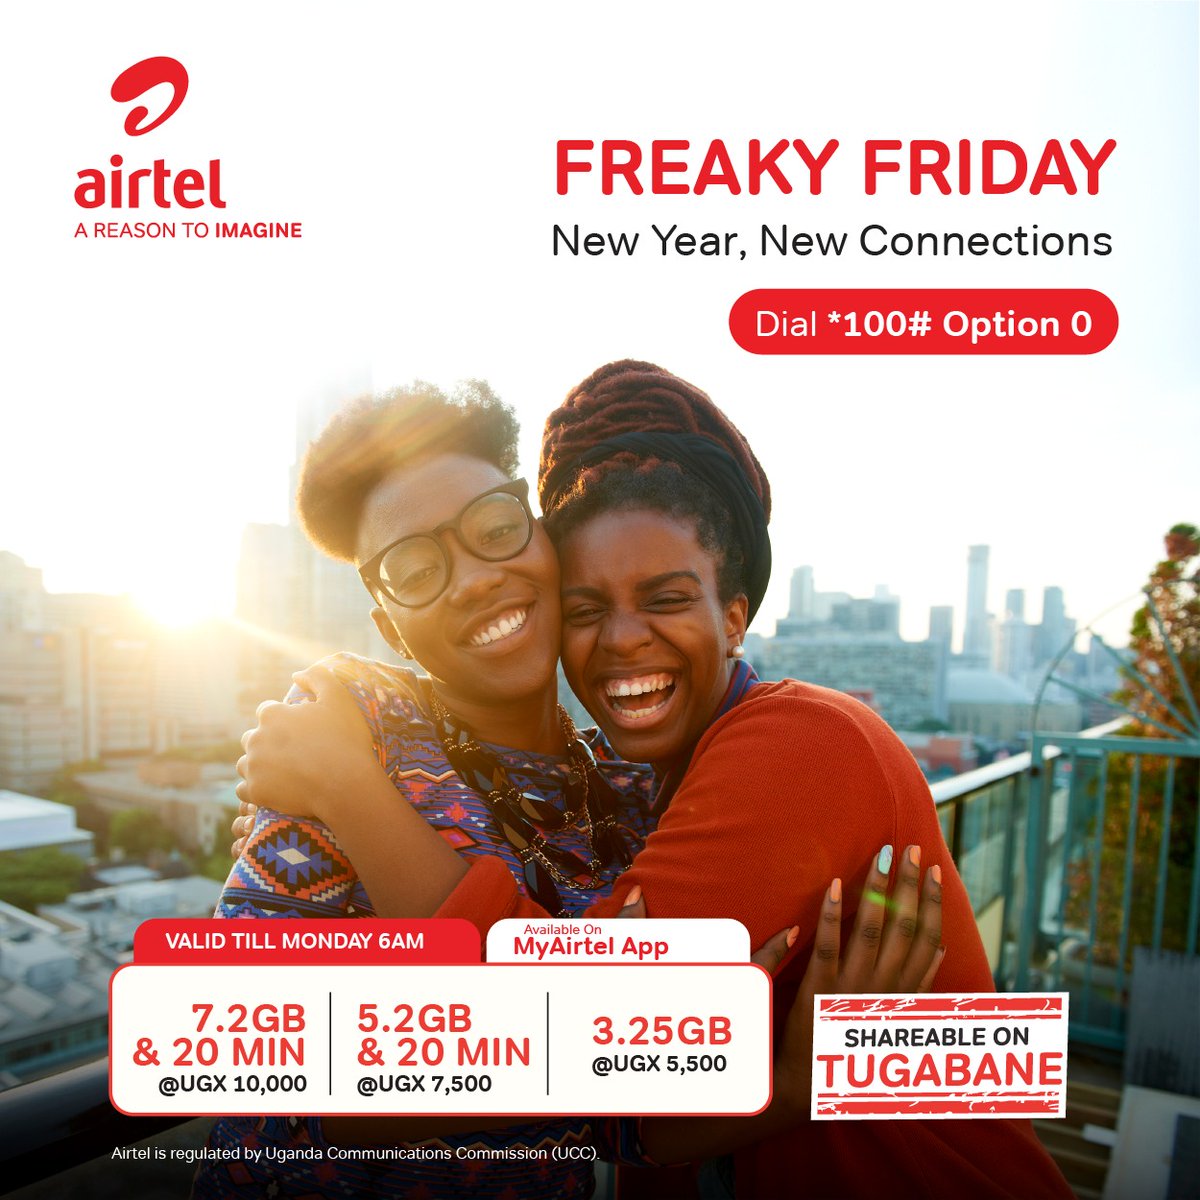 It's the 1st Friday of the year. 

Make new connections with #FreakyFriday from @Airtel_Ug.

Dial *100# and select option 0 for a bundle or use the #MyAirtelApp
airtelafrica.onelink.me/cGyr/qgj4qeu2

#AReasonToImagine